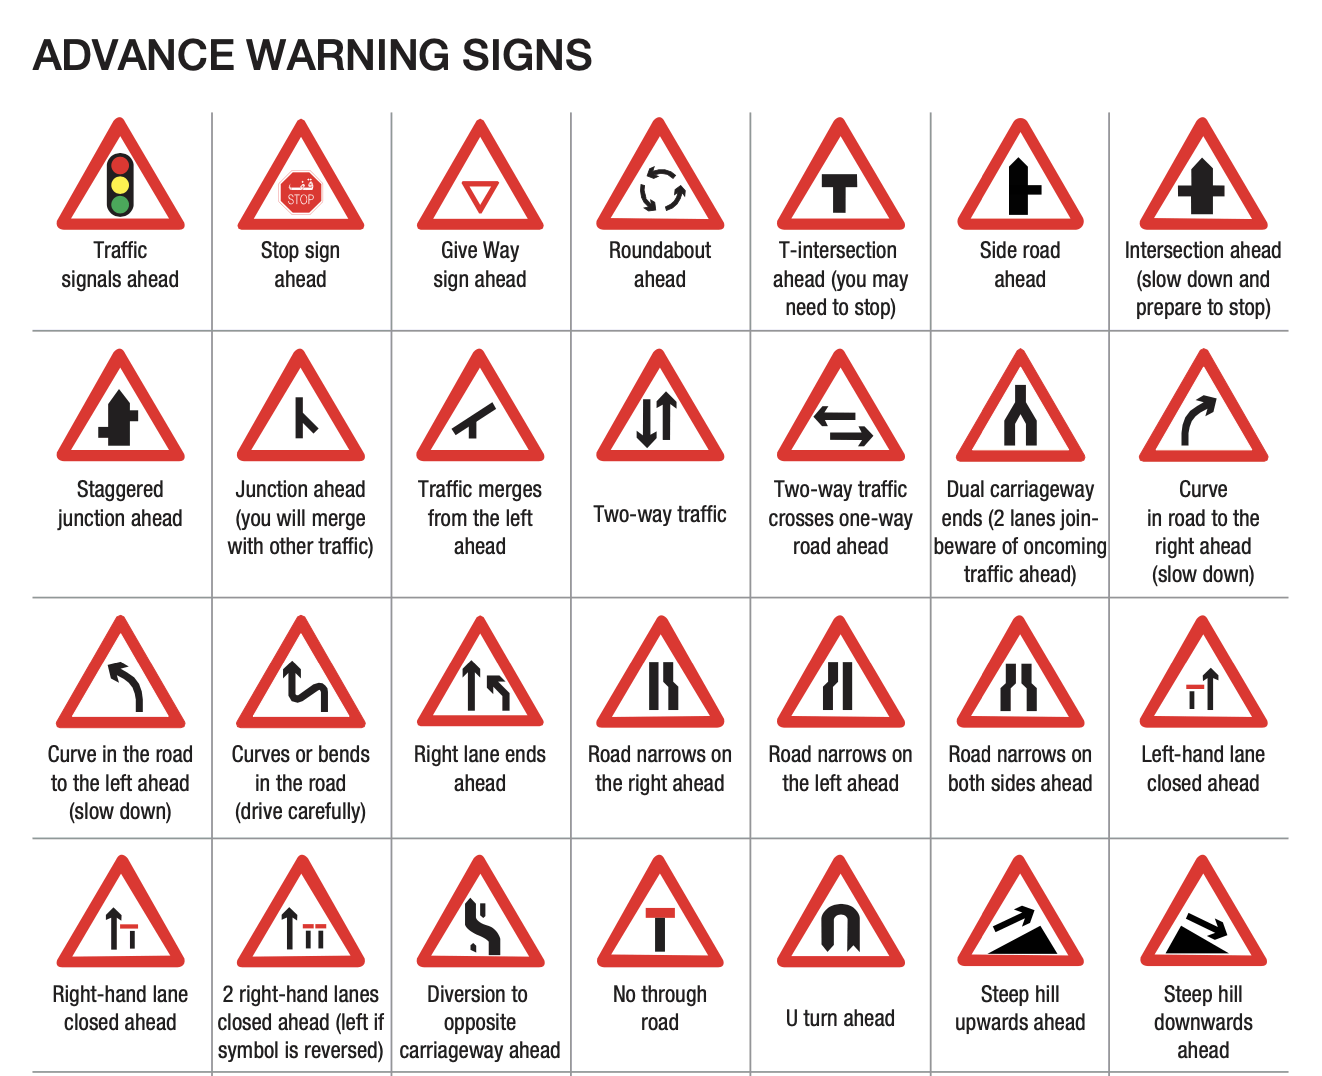 ”Warning traffic signs in the UAE